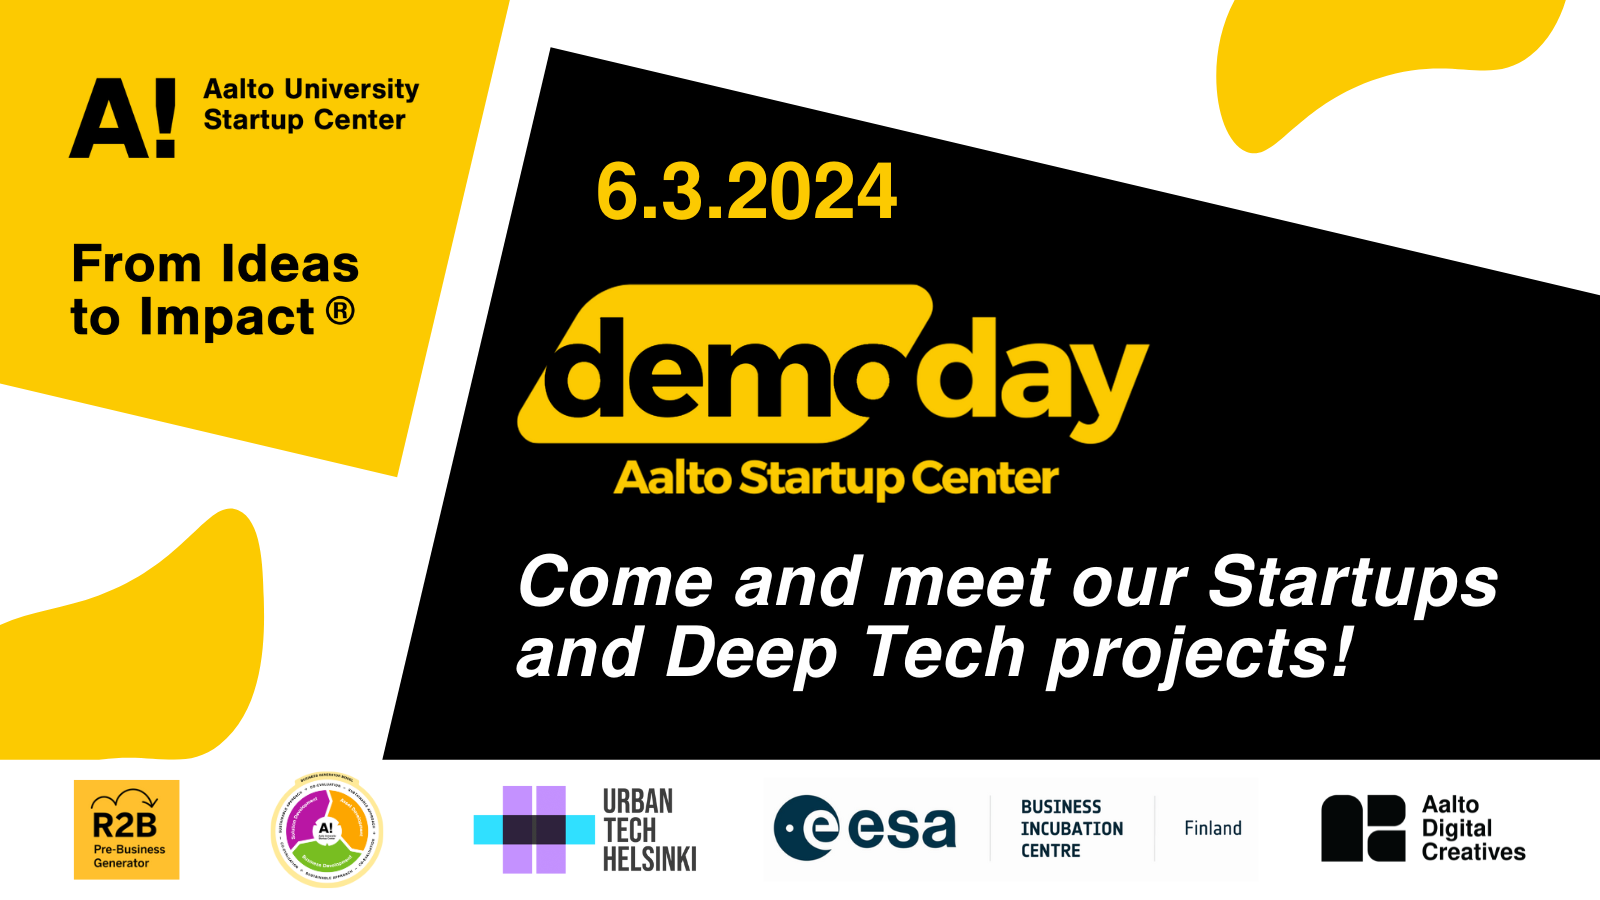 Demo Day 2024: Come and meet our Startups and Deep tech projects - Aalto Startup Center